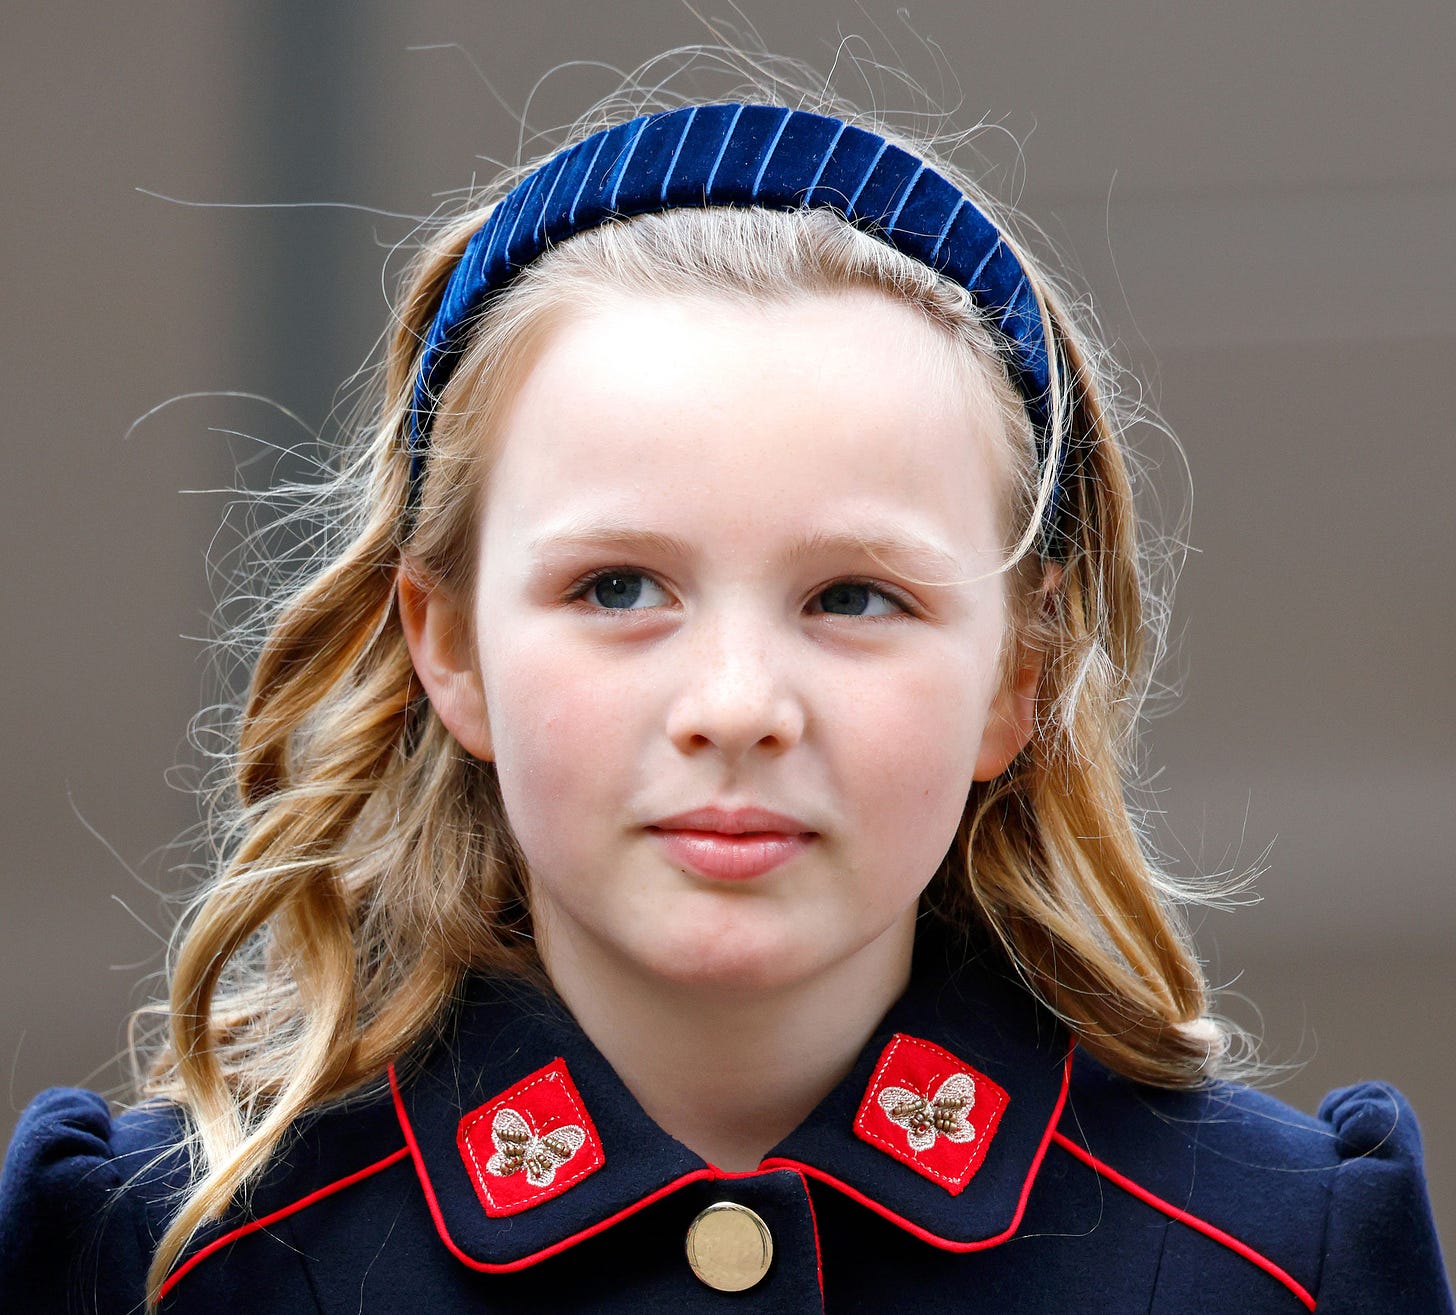 Mia Tindall dressed in a coat walking to Westminster Abbey